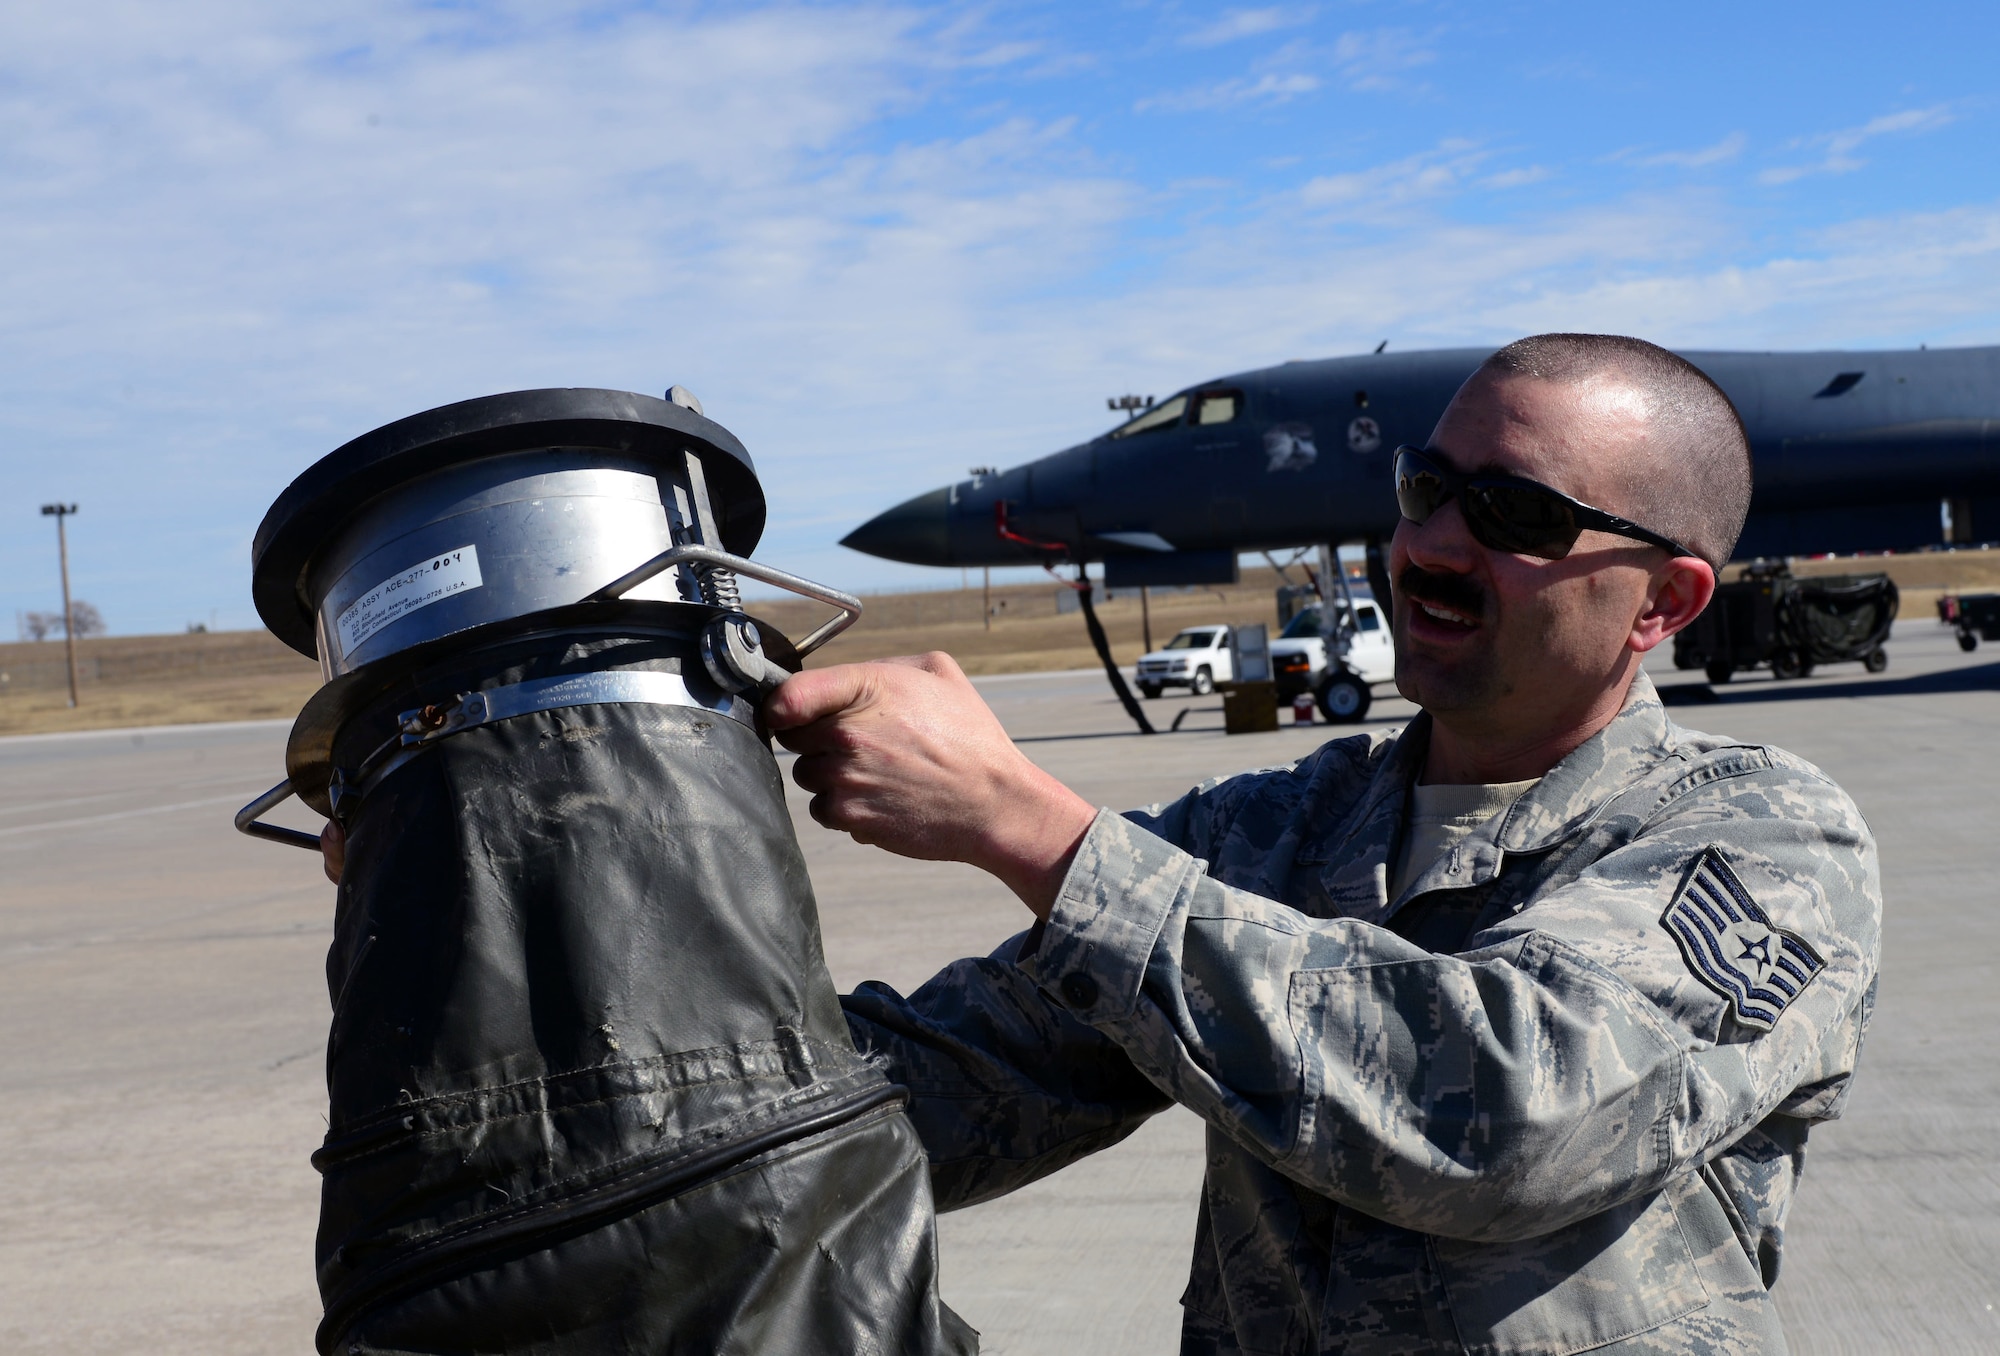 Tech. Sgt. Caleb Warren, an aerospace ground equipment craftsman assigned to the 28th Maintenance Squadron, holds up a Consolidated Aircraft Support System air valve at Ellsworth Air Force Base, S.D., March 16, 2017. Over the course of the last 10 years the 28th Civil Engineer Squadron and 28th MXS have put more than $500,000 worth of modifications into CASS in order to keep it running. (U.S. Air Force photo by Airman 1st Class Donald C. Knechtel)